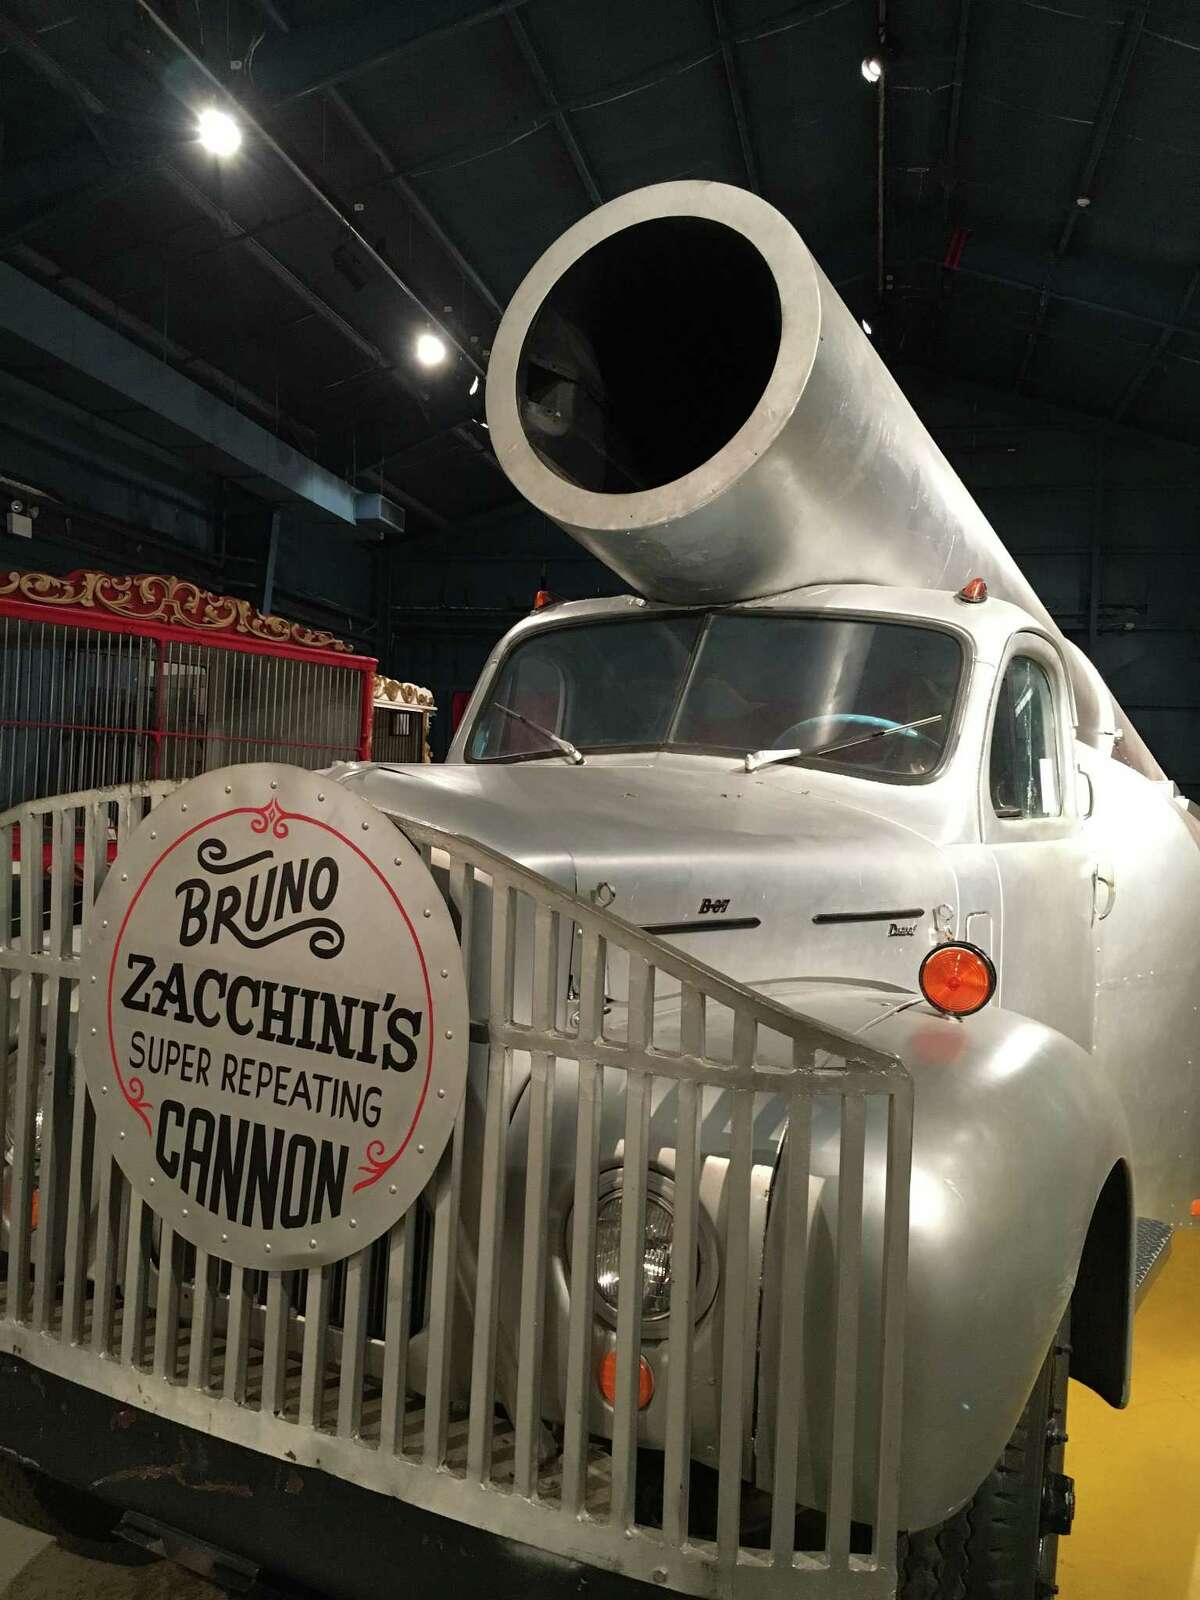 A human canon from an old circus is on display at the Ringling Circus Museum in Sarasota, Florida.